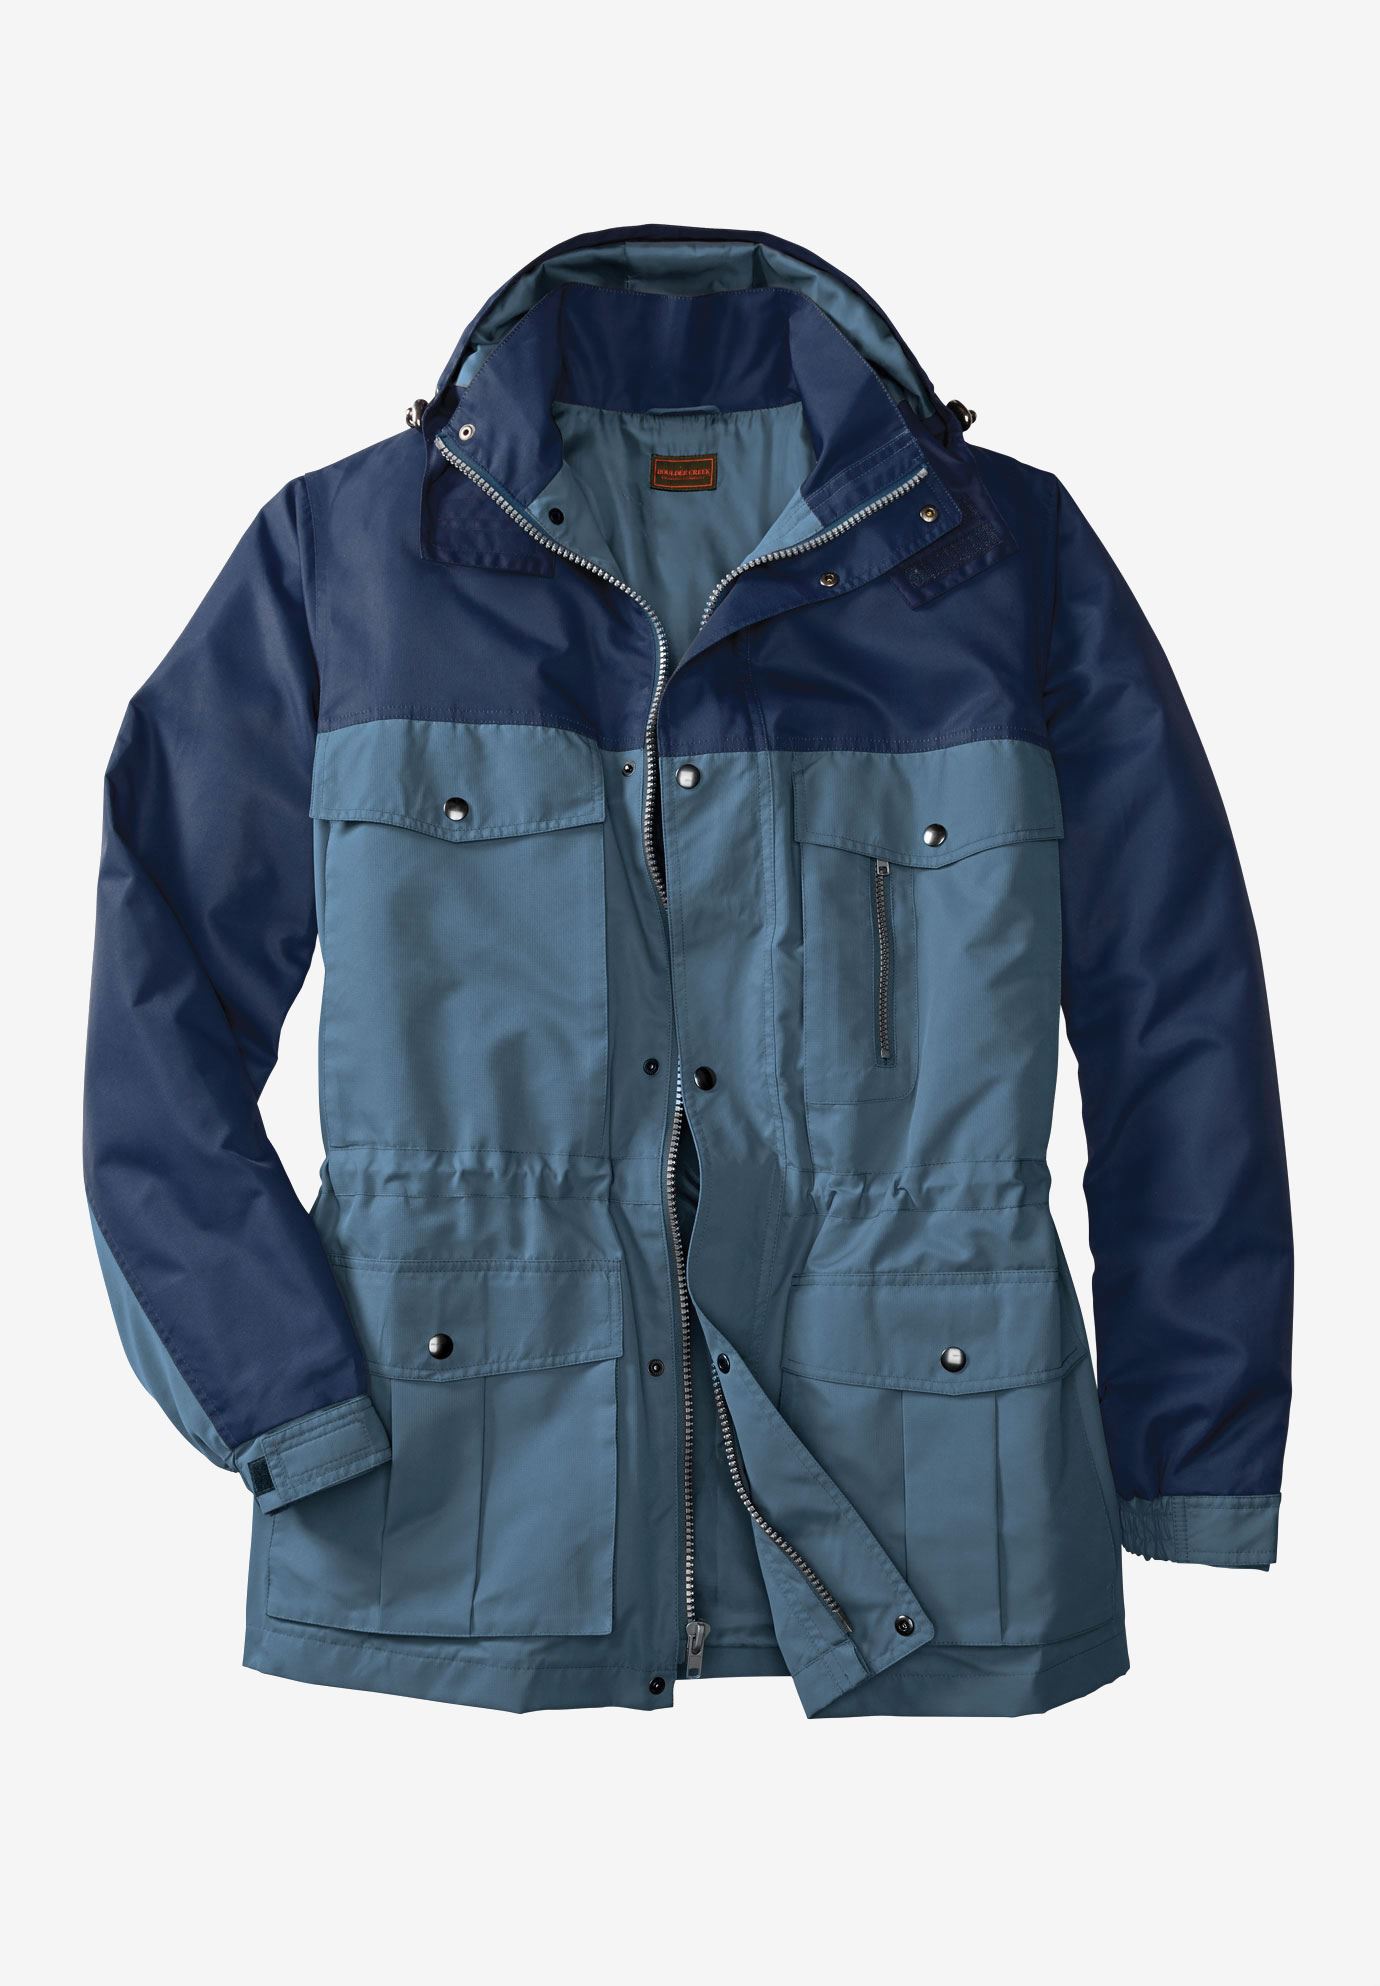 Lightweight Expedition Parka by Boulder Creek®| Big and Tall Outerwear ...